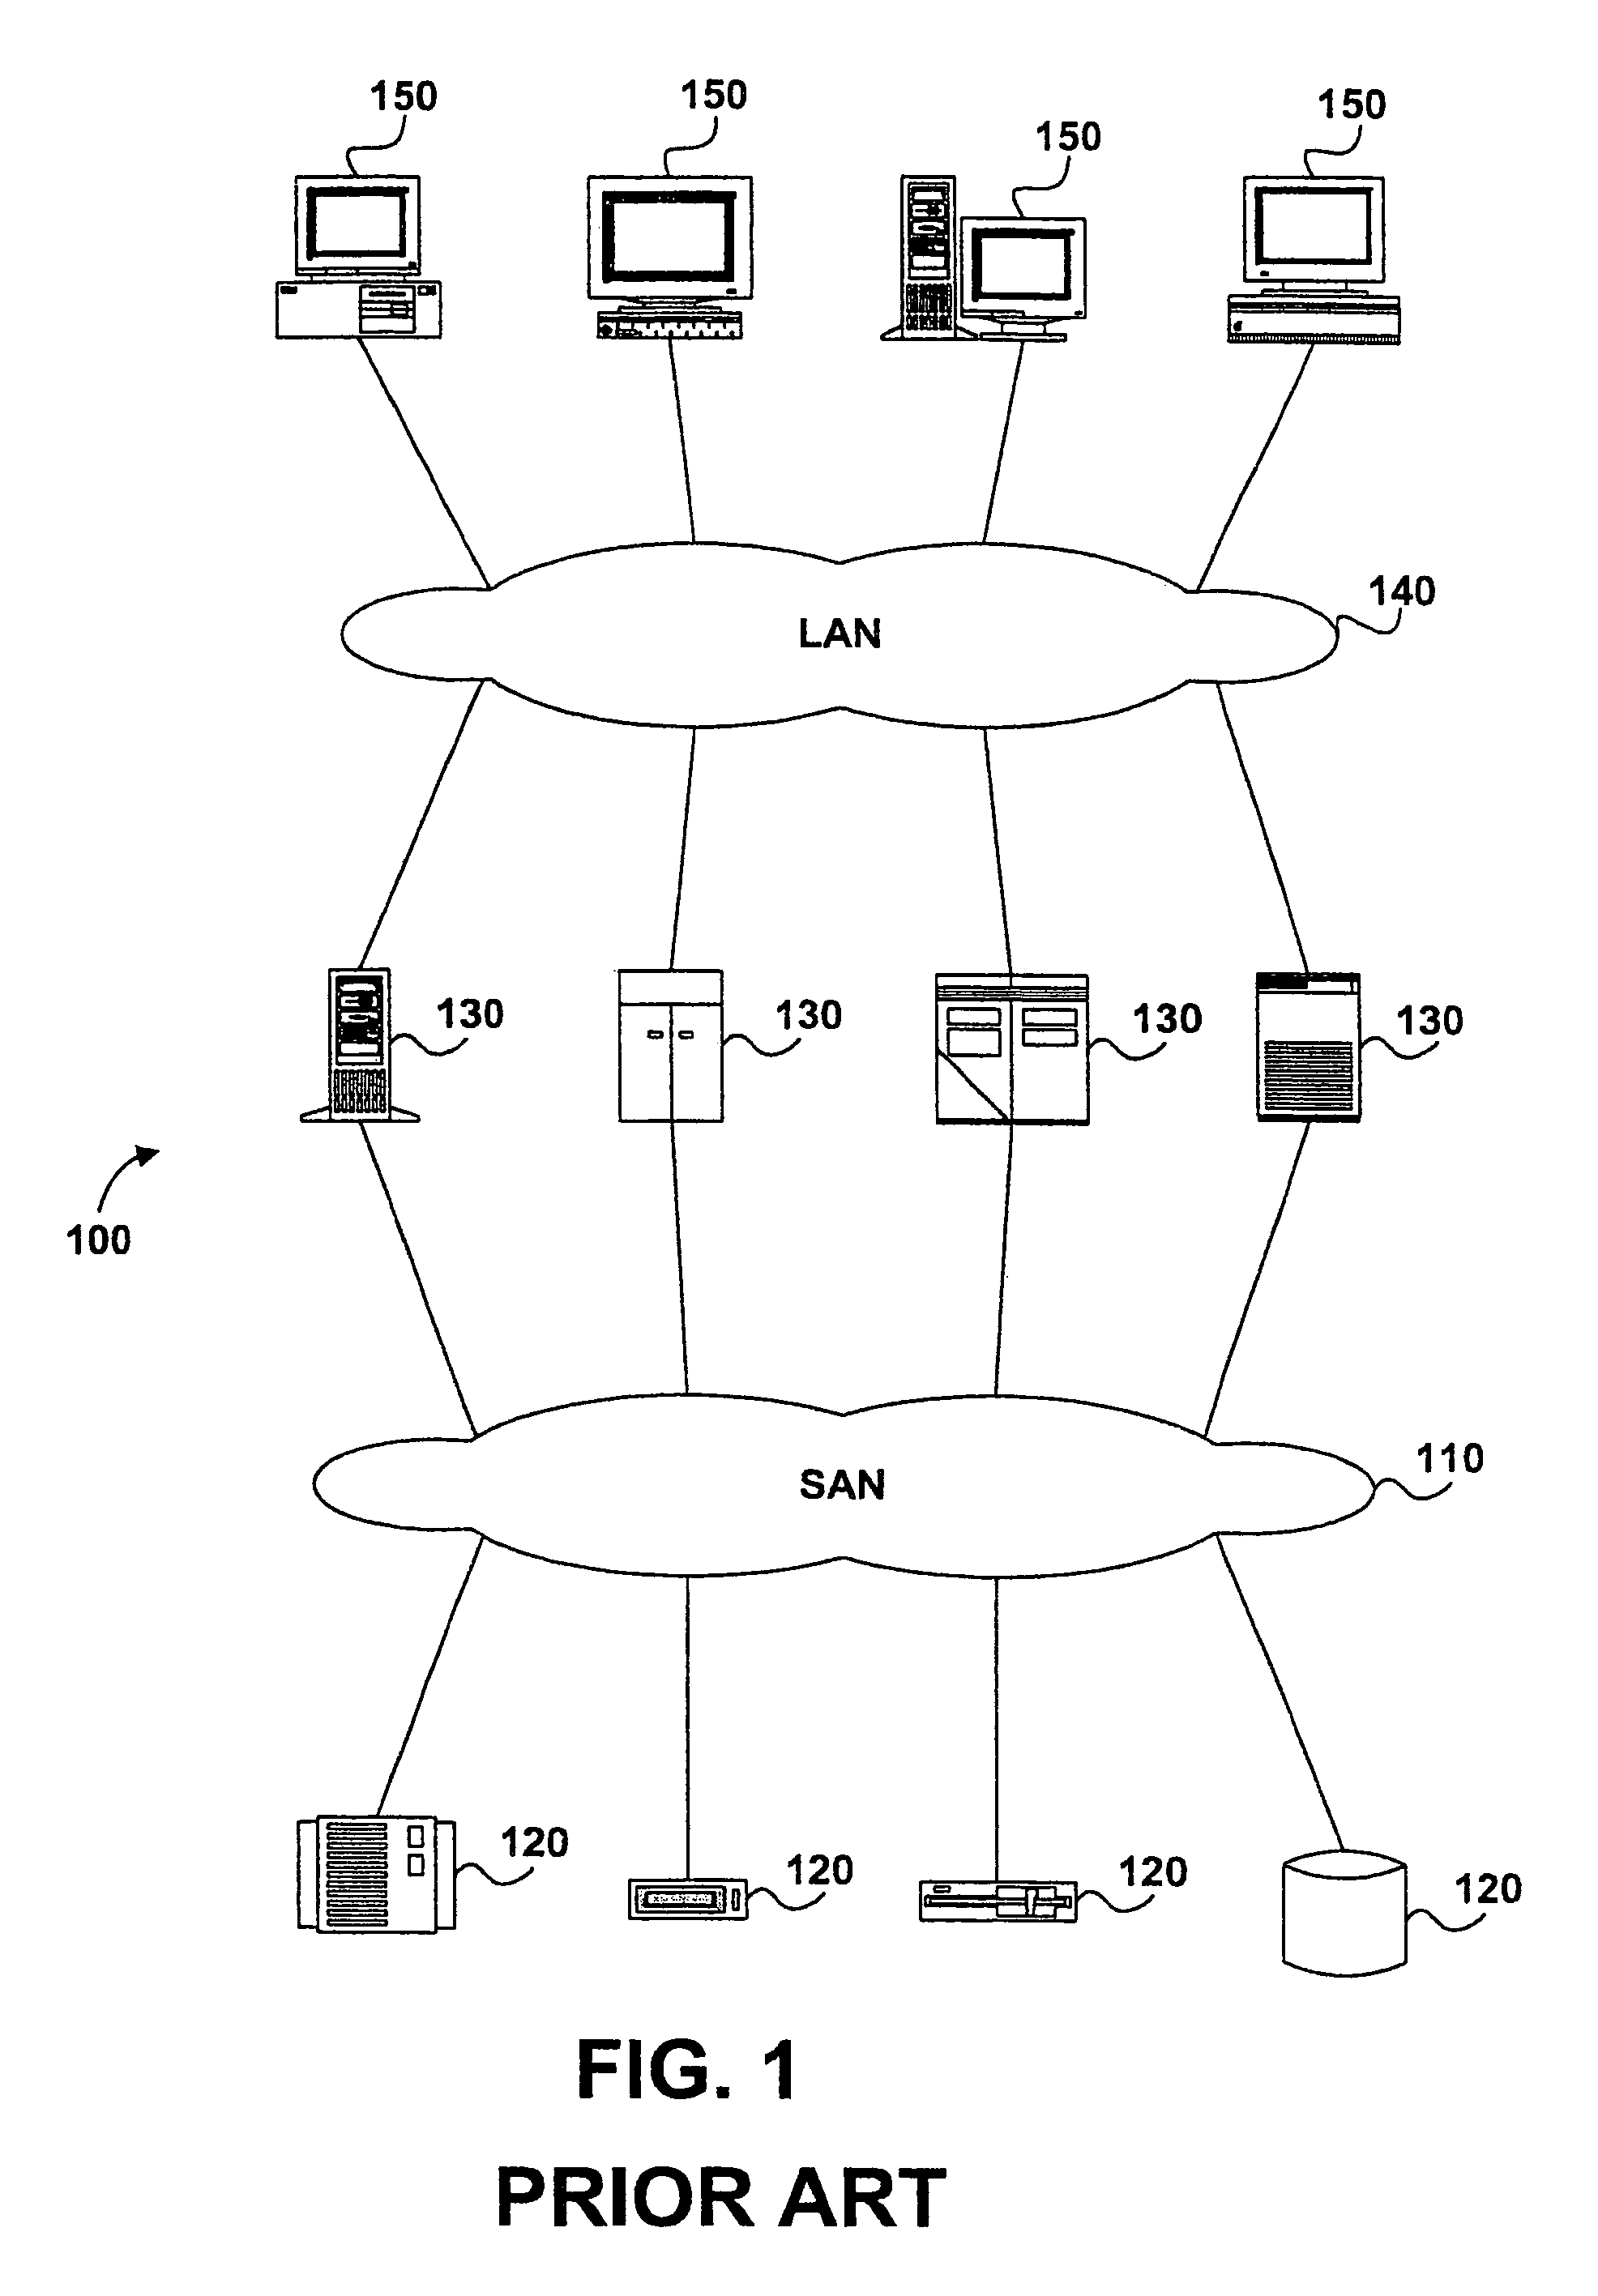 System and method for preventing sector slipping in a storage area network